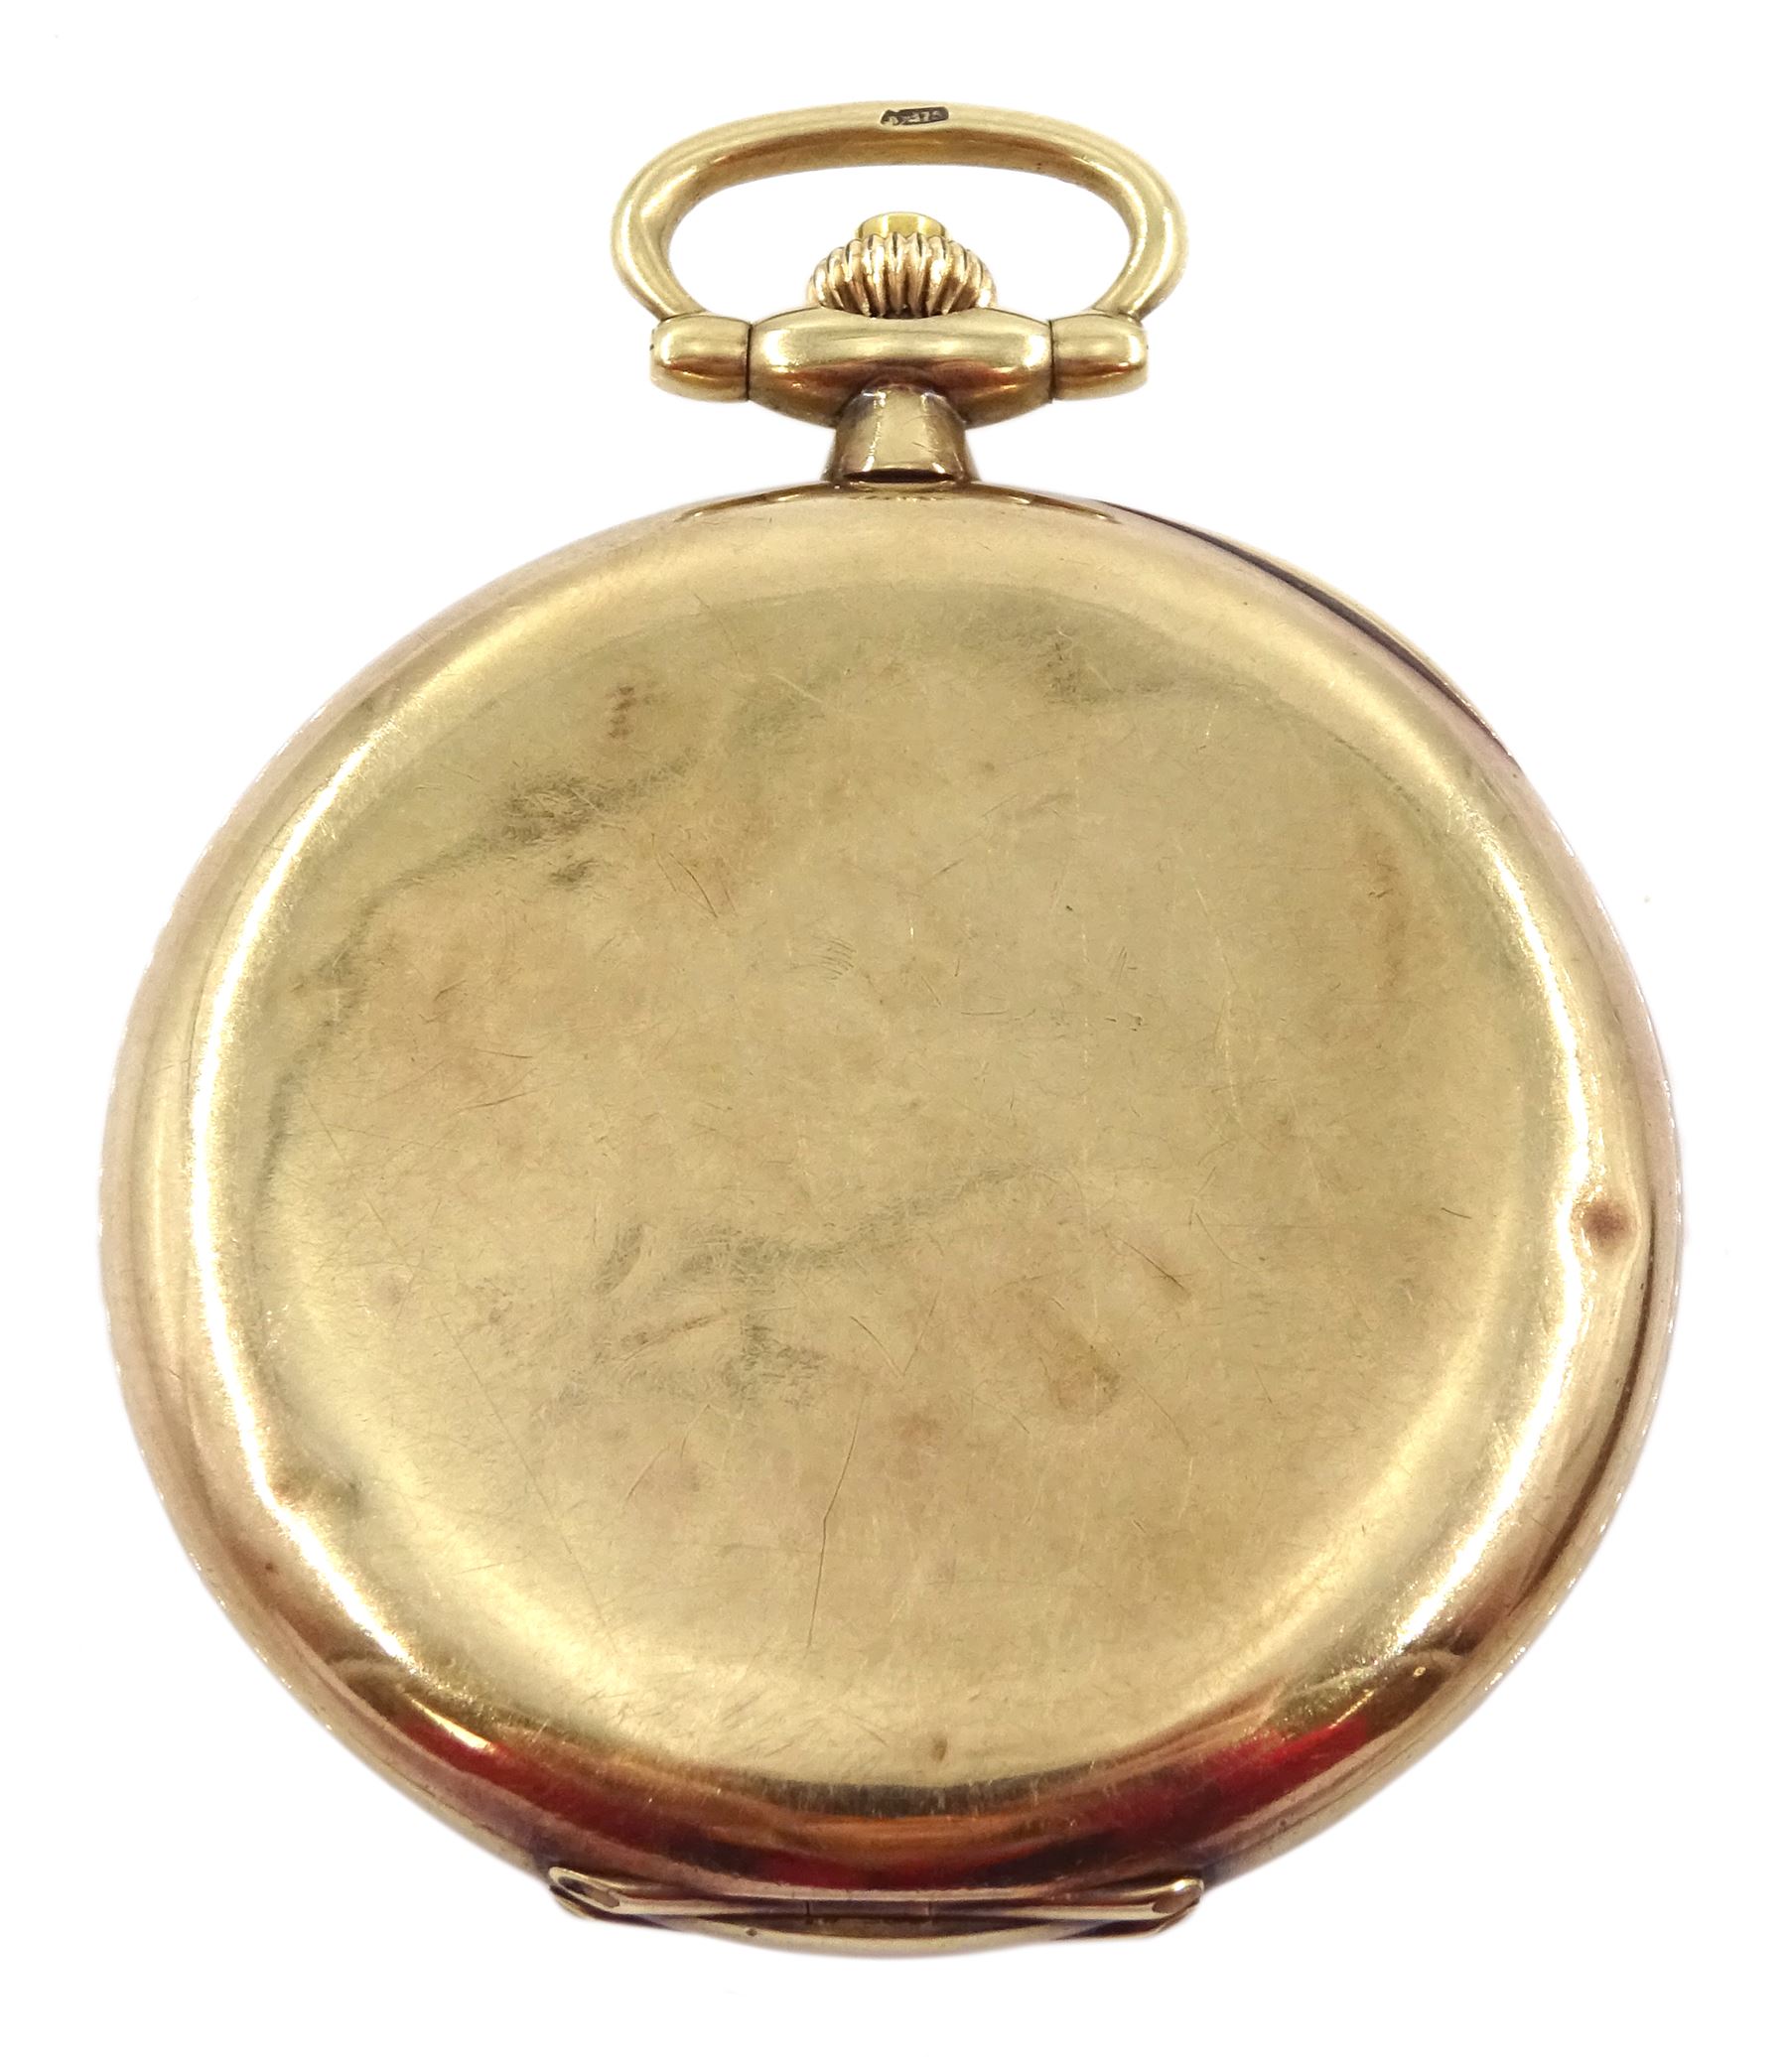 Early 20th century half hunter key wound lever pocket watch by Zenith - Image 3 of 6